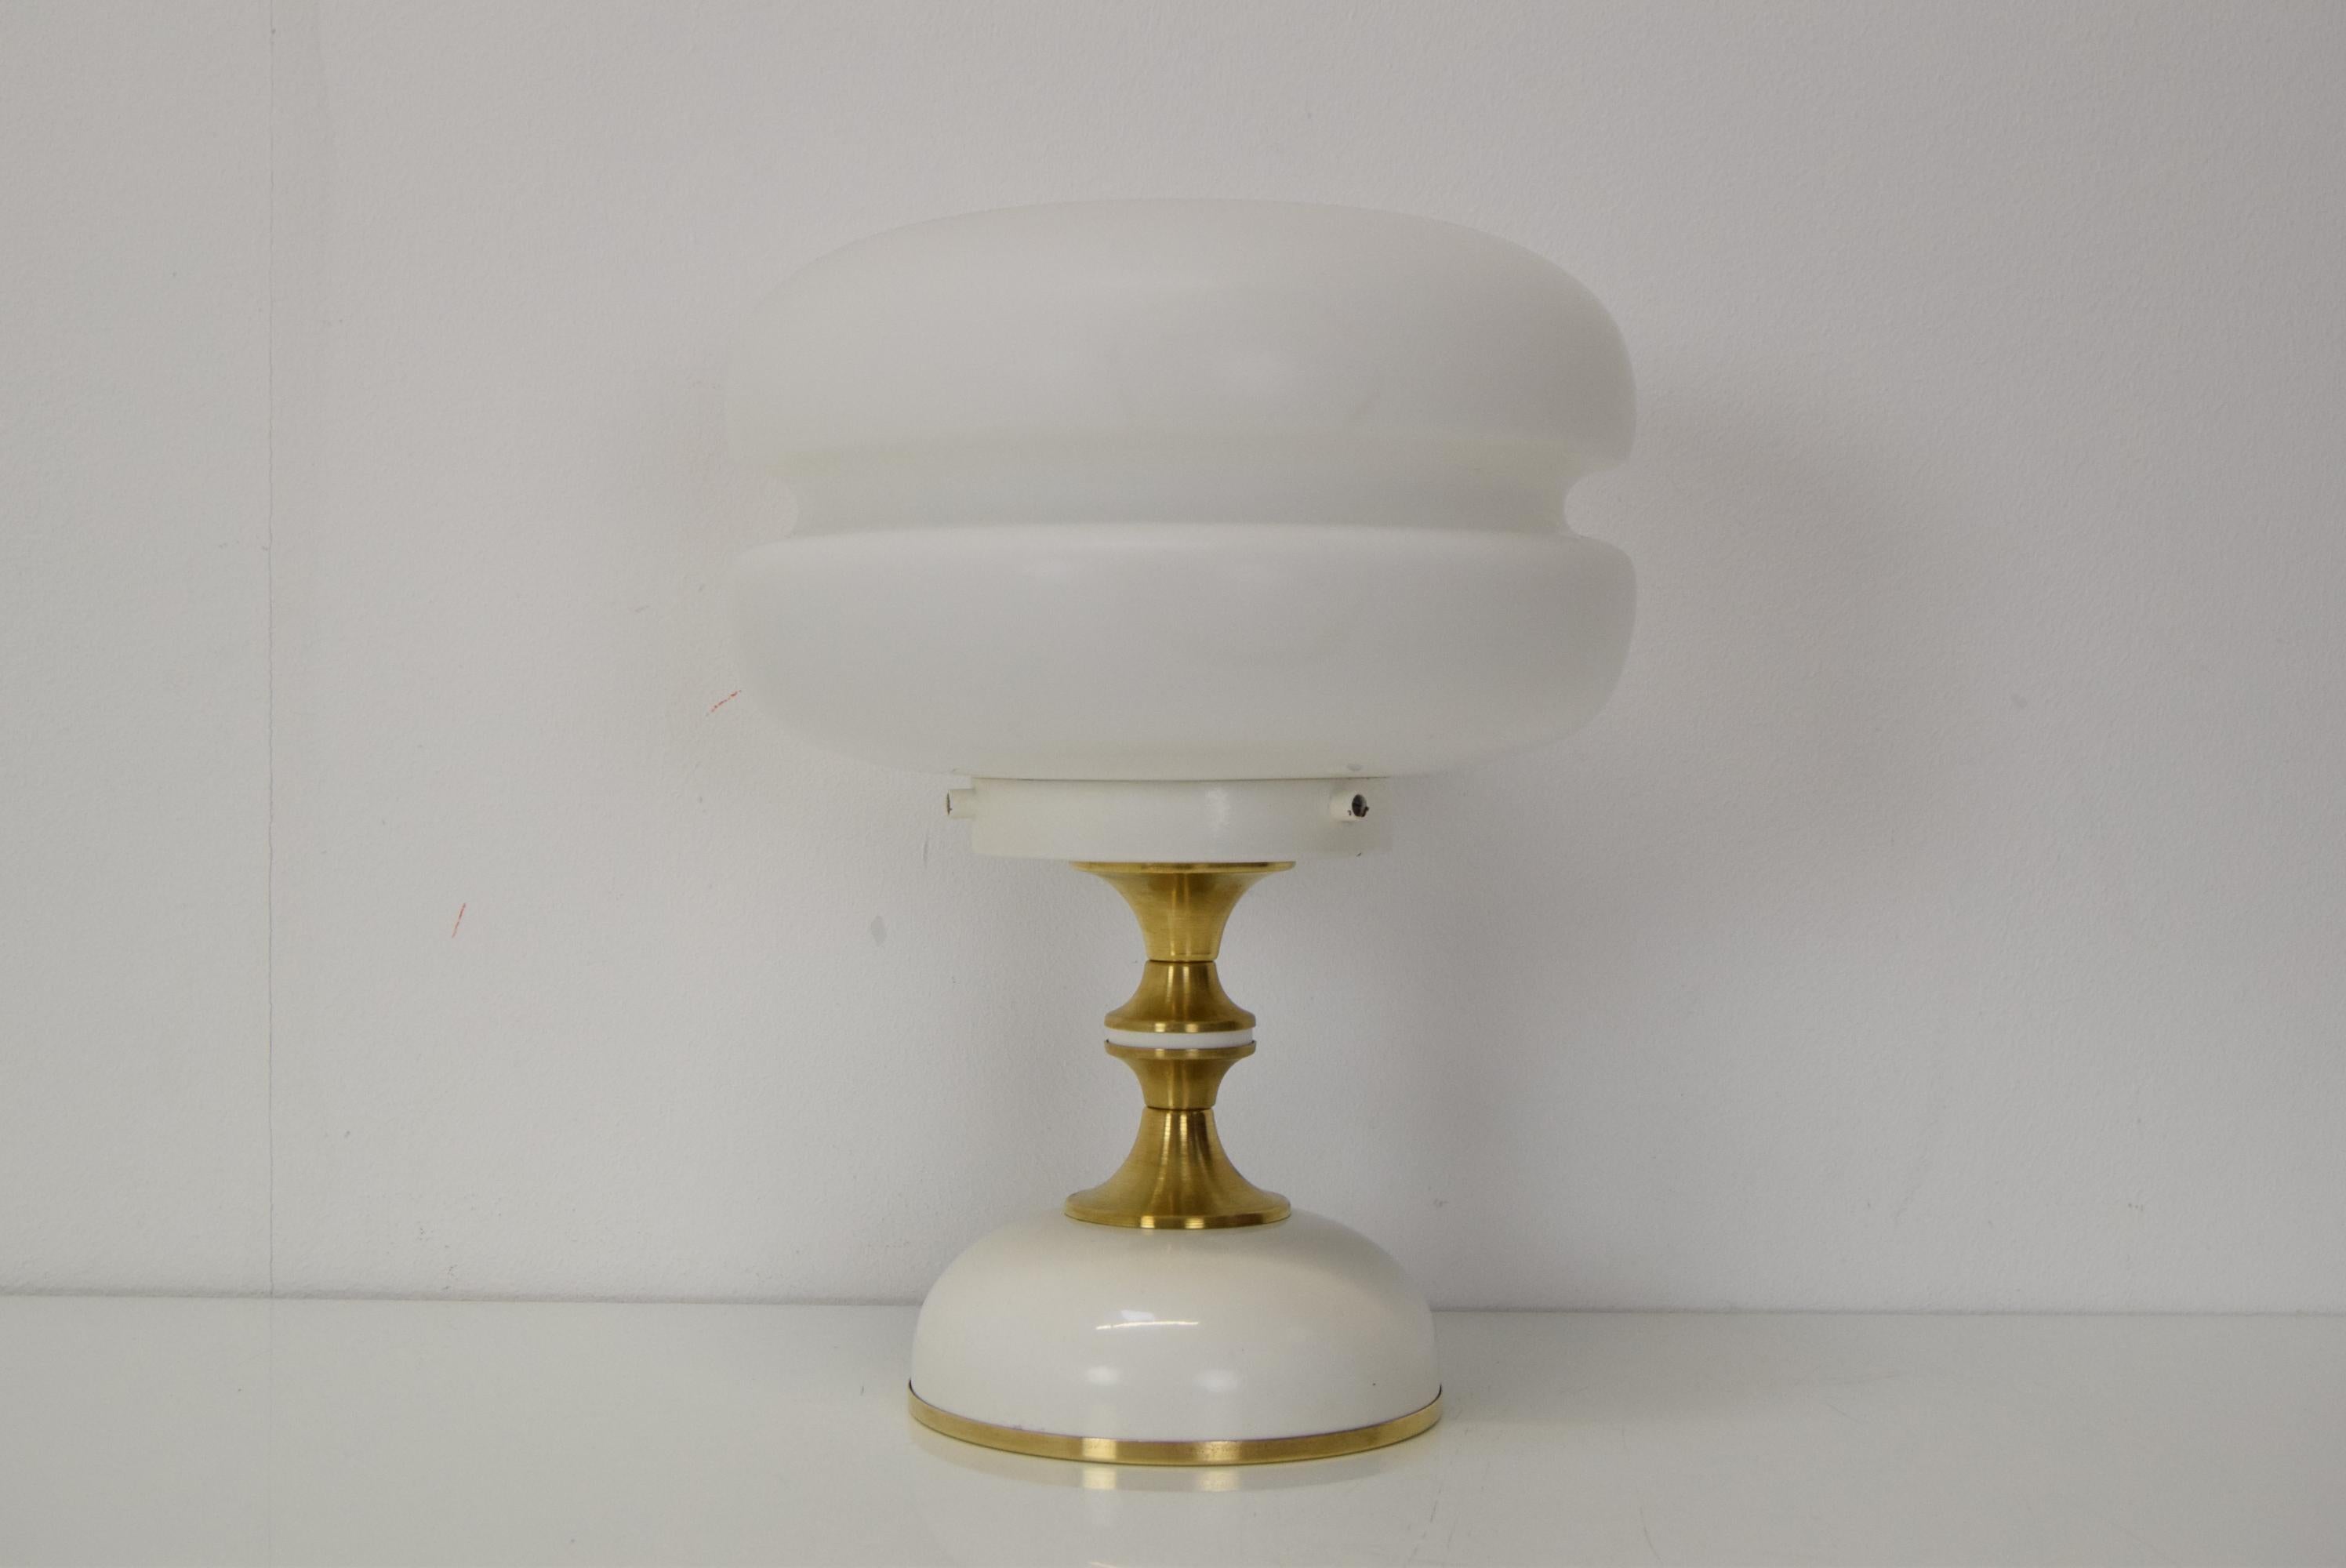 
Made in Opaline Milk Glass,Metal,Brass
The lamp was completely disassembled and cleaned
It is equipped with a new electrical installation
60W, E27 or E26 bulb
US adapter included
With aged patina
Good Condition